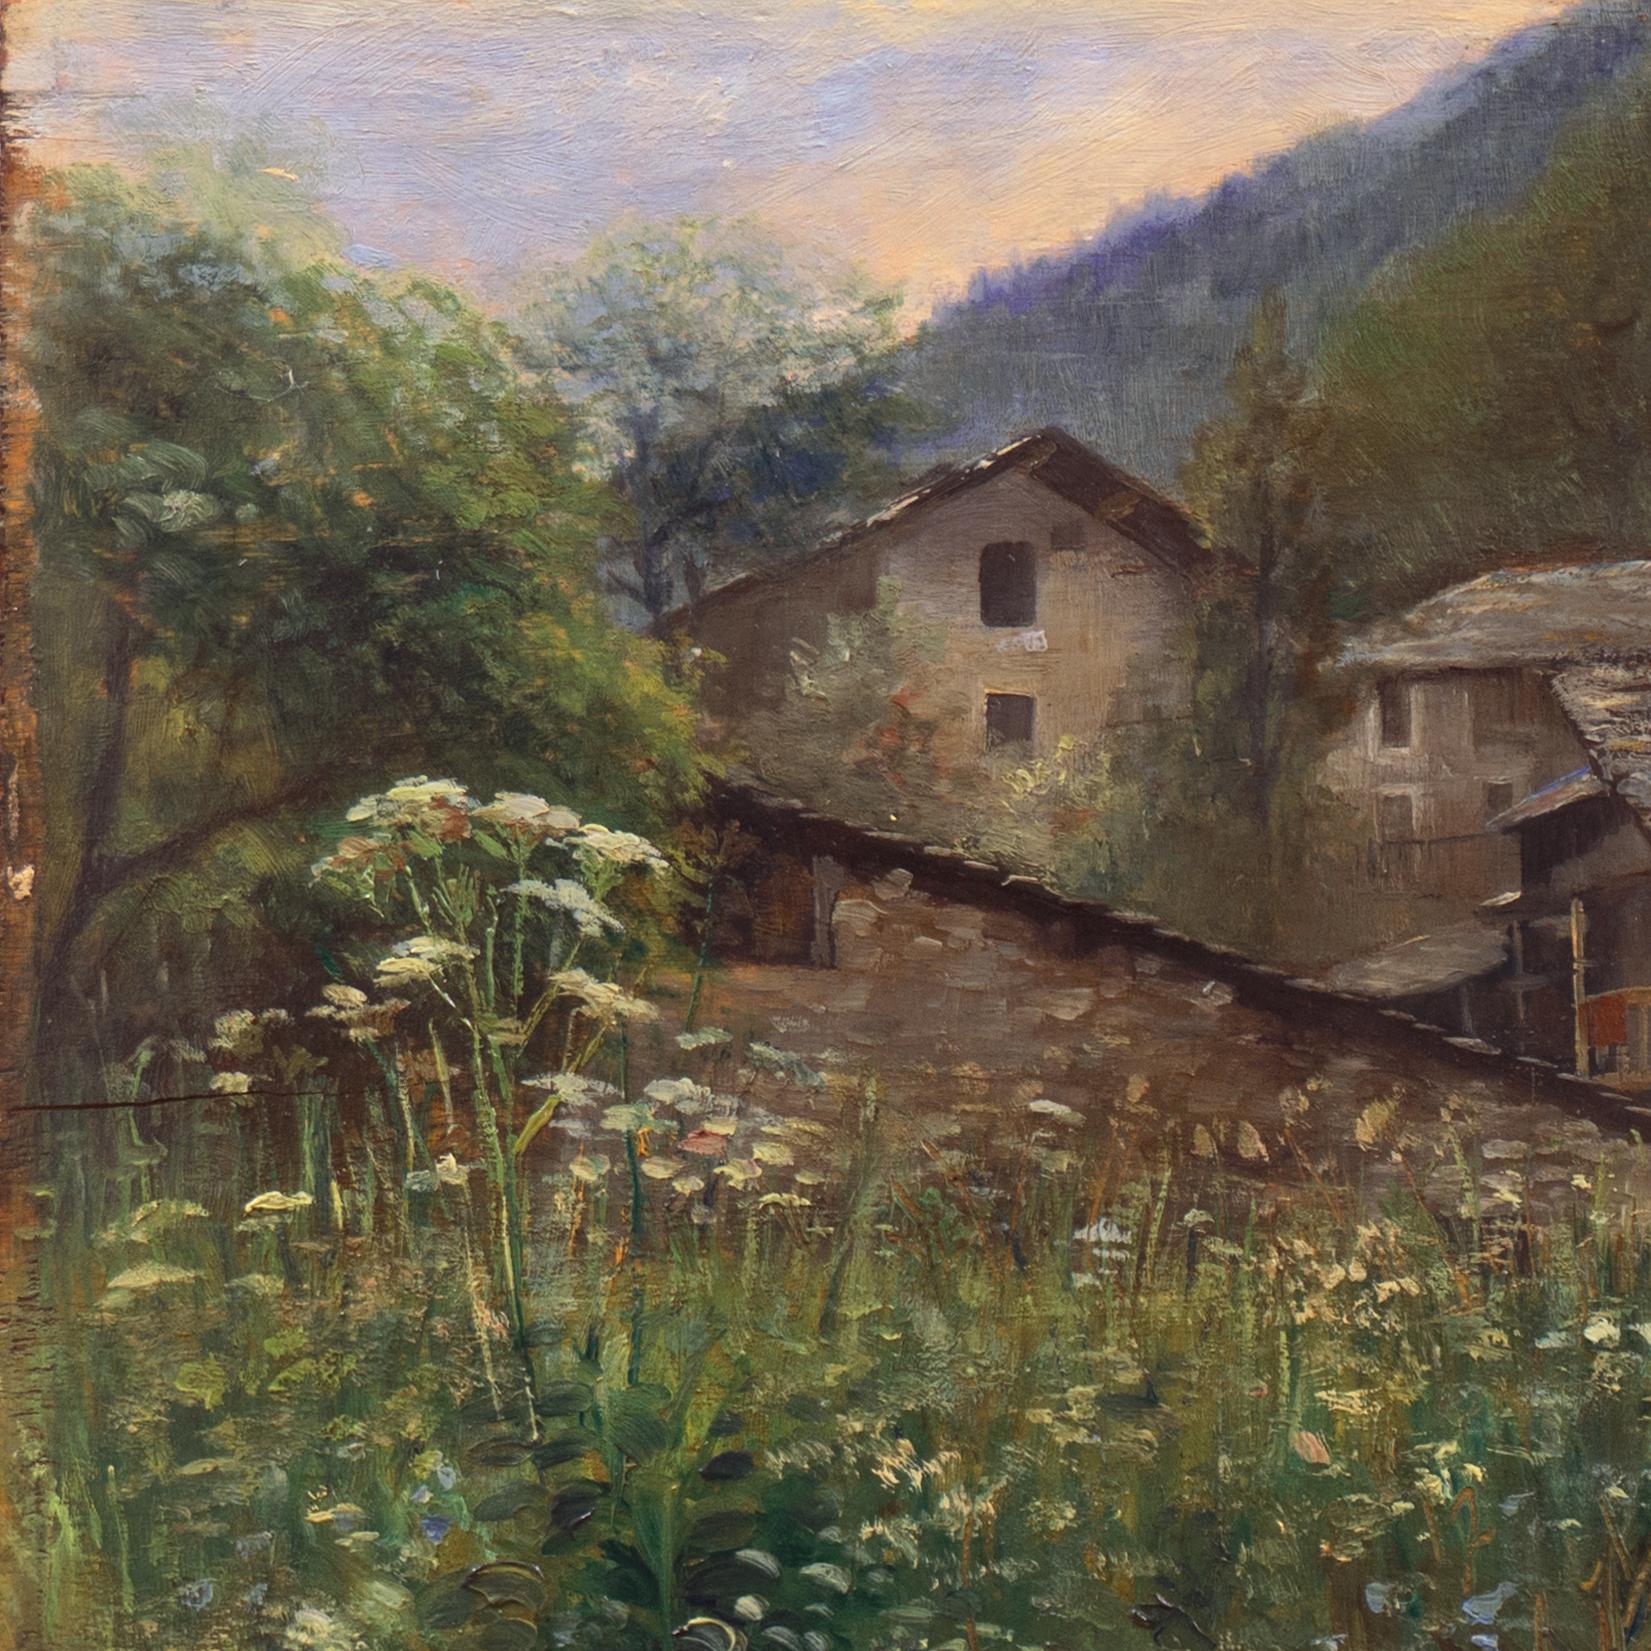 'Spring in the Soana Valley, ' Dolomites, Piedmont, Gran Paradiso National Park - Realist Painting by Anselmo Sacerdote